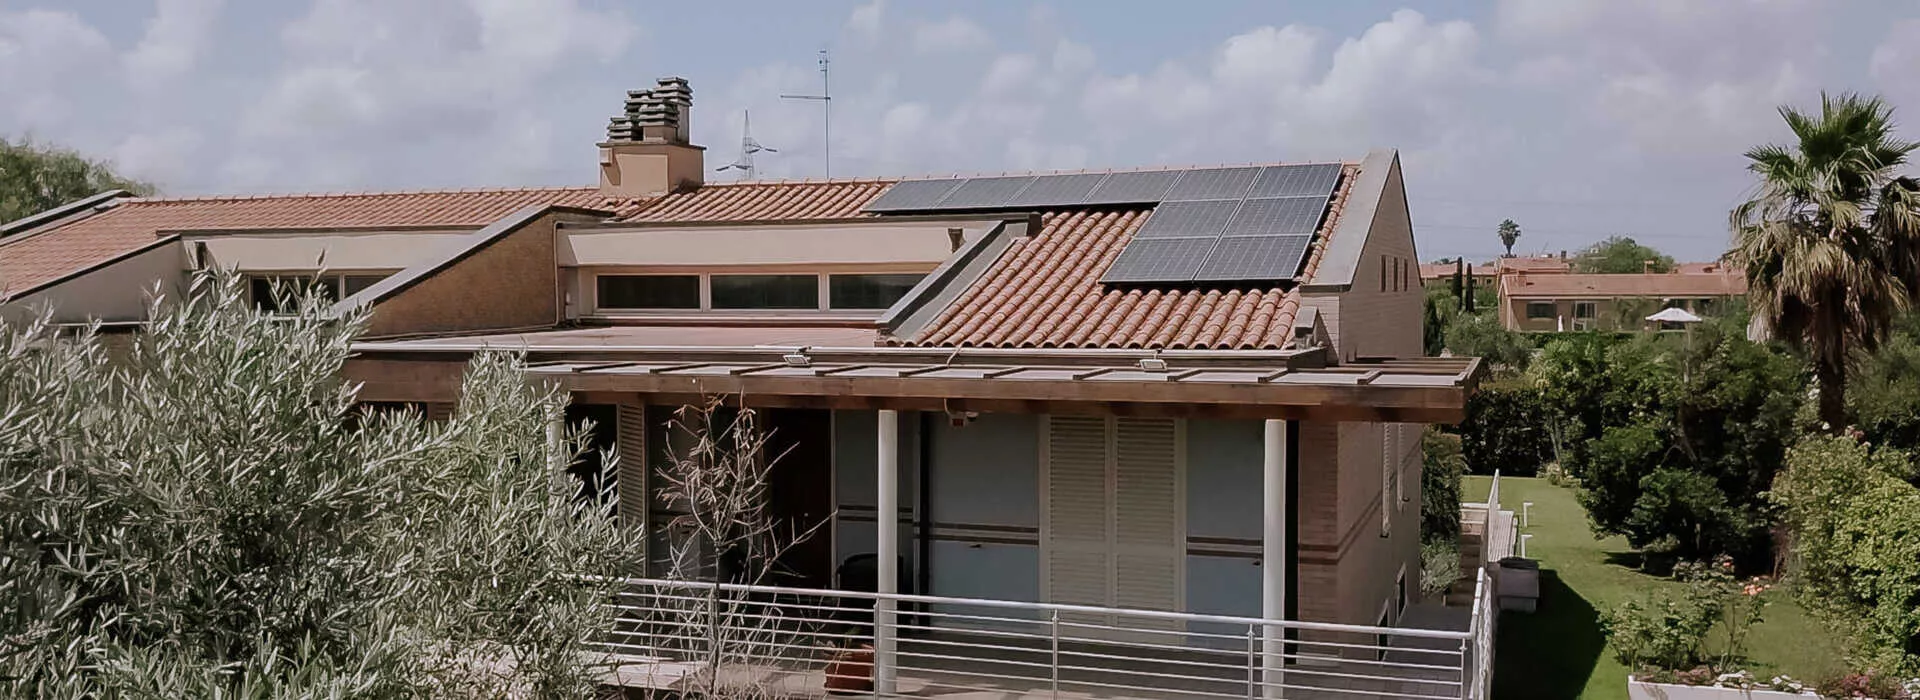 solar panels on residential home roof